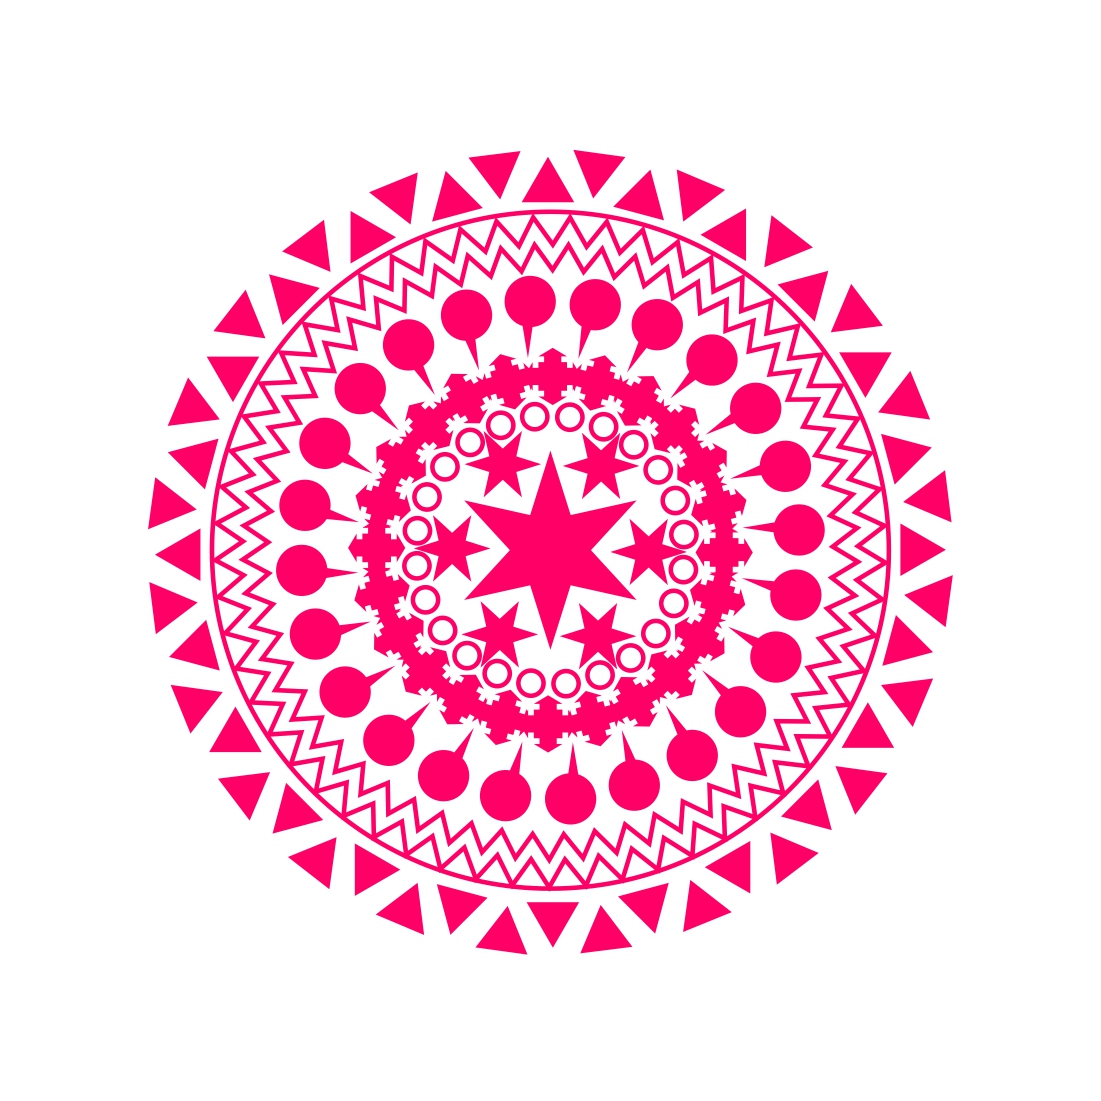 Modern Mandala Design Files DXF PNG For Print On Demand Projects DXF PNG SVG JPG cover image.